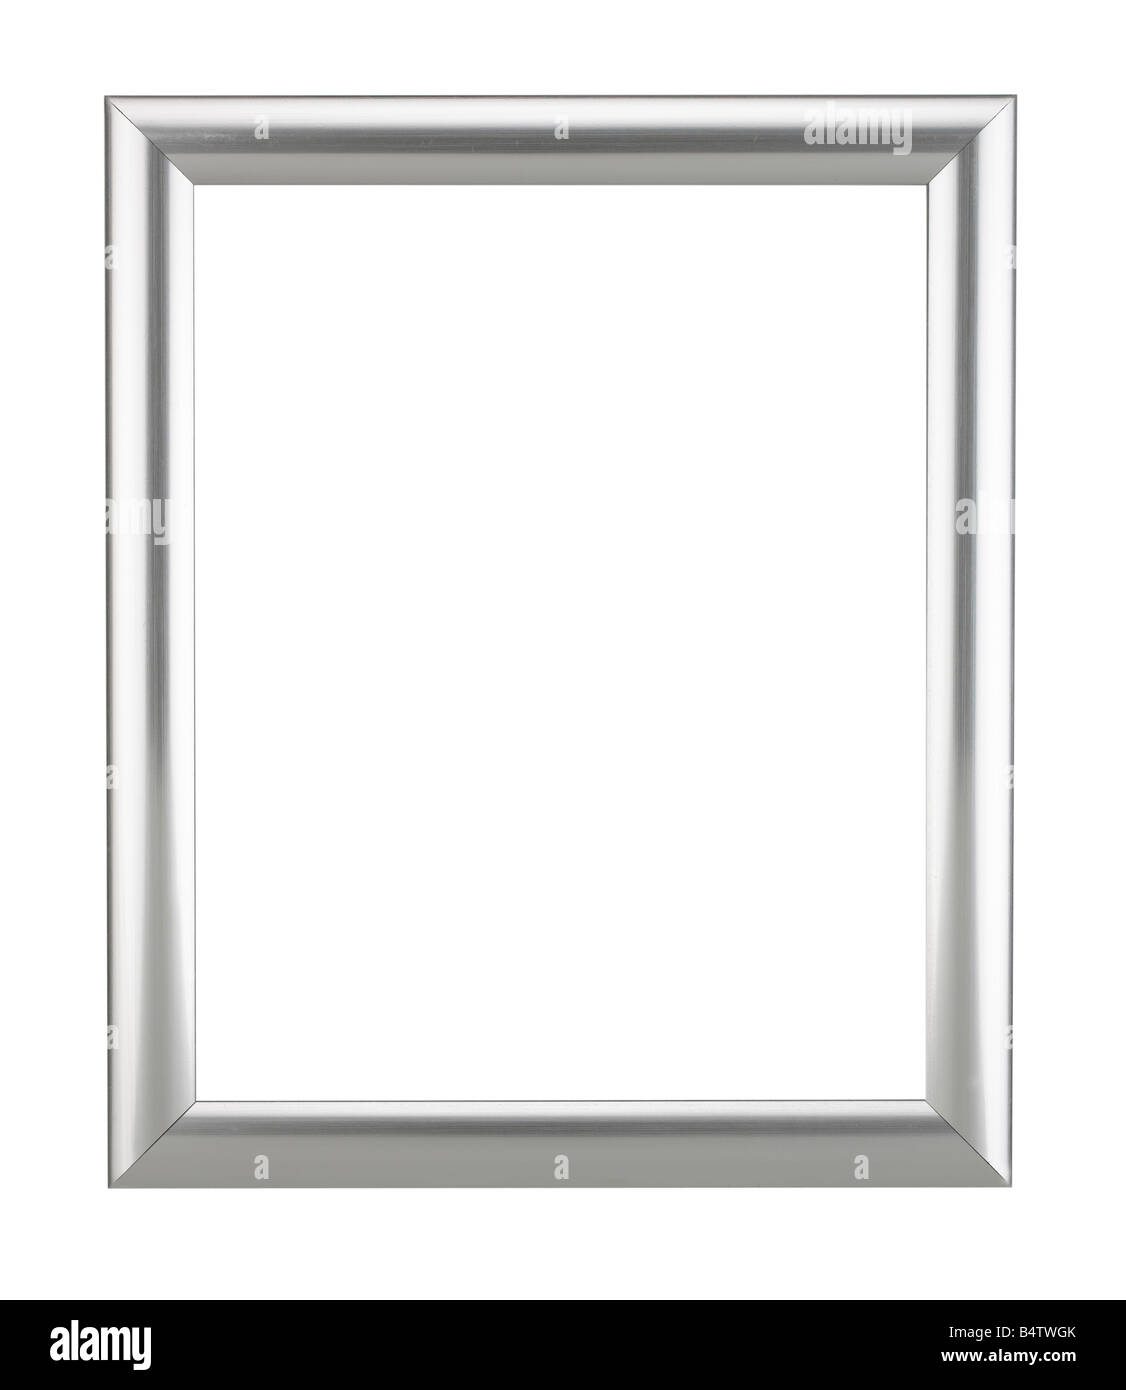 SILVER WOOD PICTURE FRAME Stock Photo